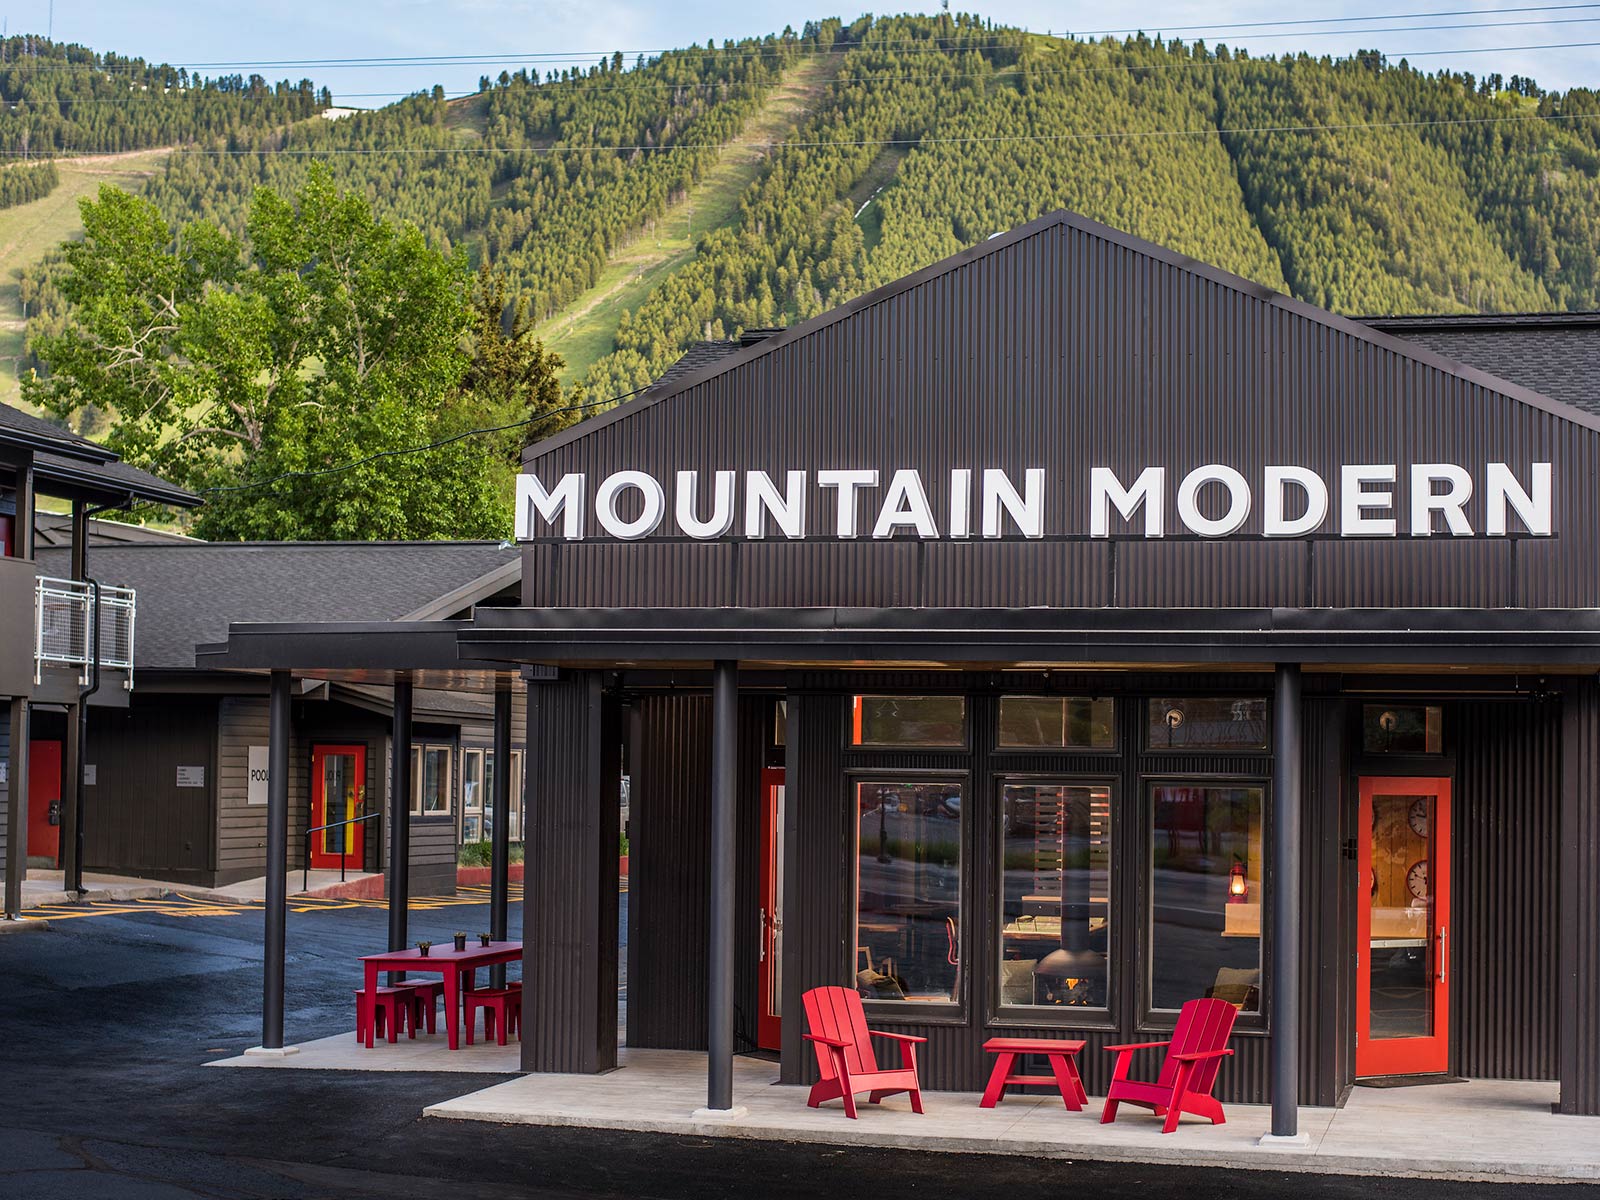 Mountain Modern Motel Entrance with Snow King Mountain in the background